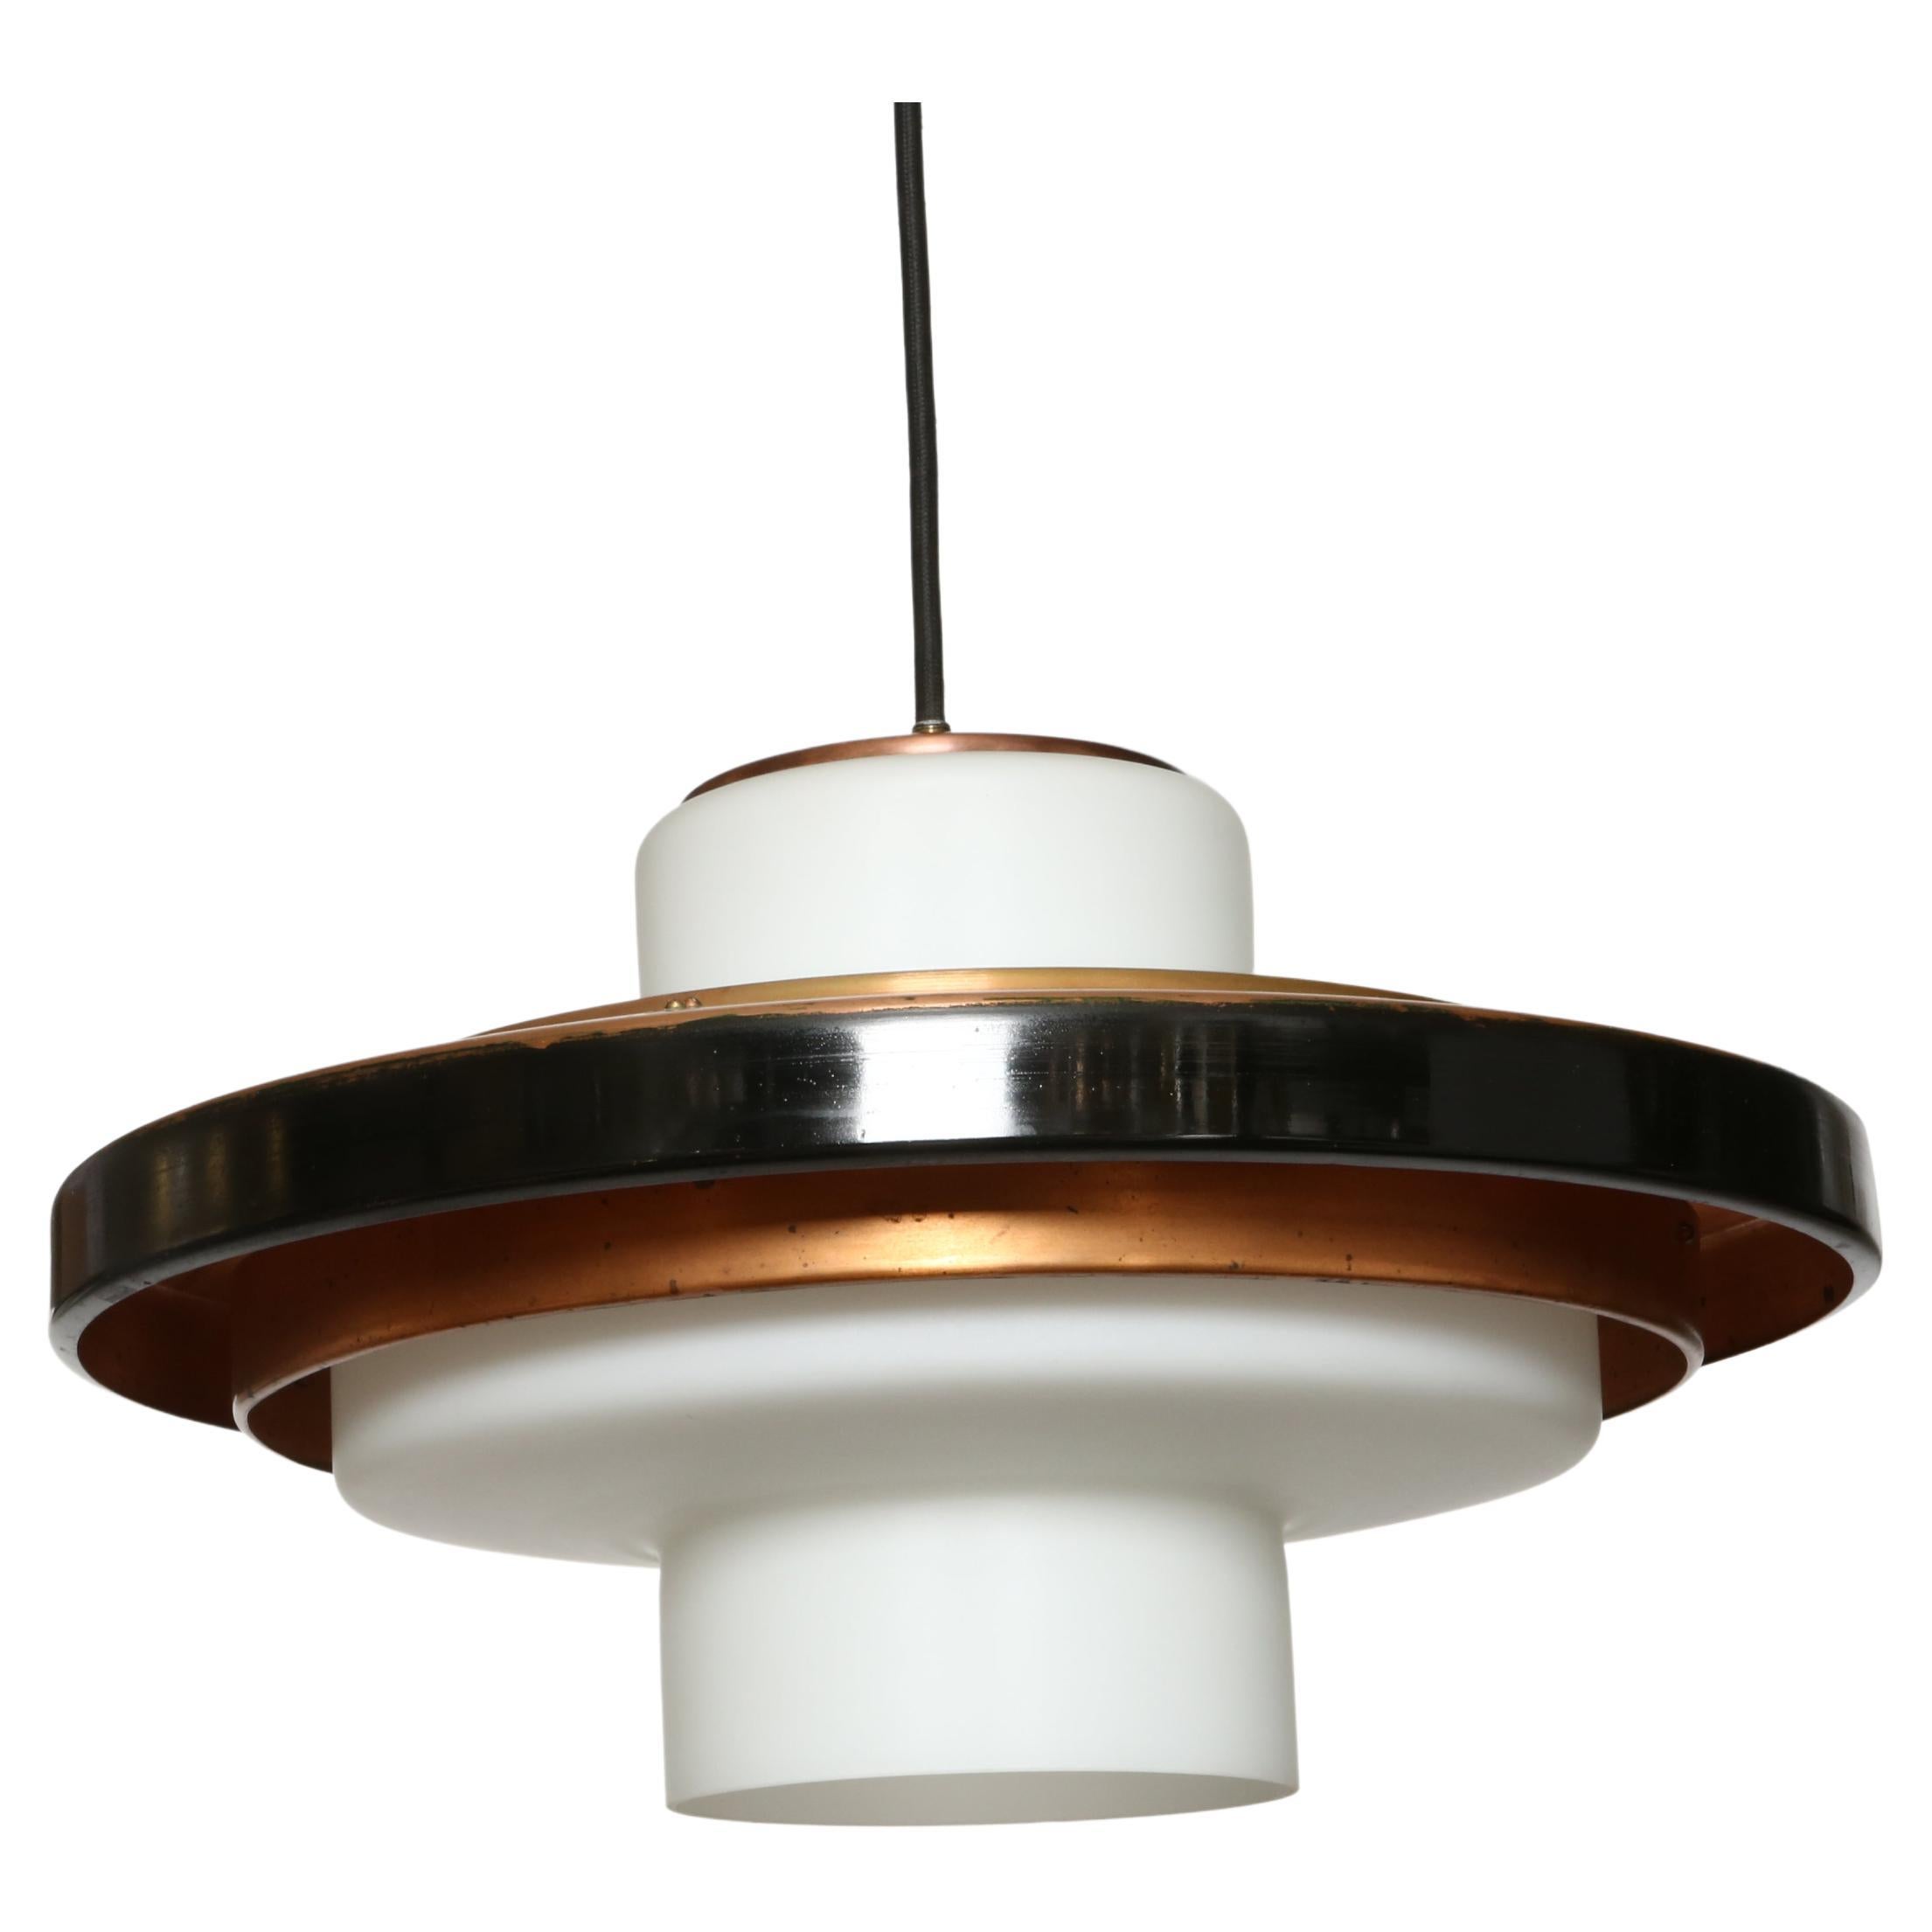 Stilnovo ceiling pendant model 1219, a pair.
Italy, 1960s.
Opaline glass, copper, enameled copper.
Black fabric cord.
One medium base socket.
Rewired for US.
Overall drop can be made shorter.

We take pride in bringing vintage fixtures to their full